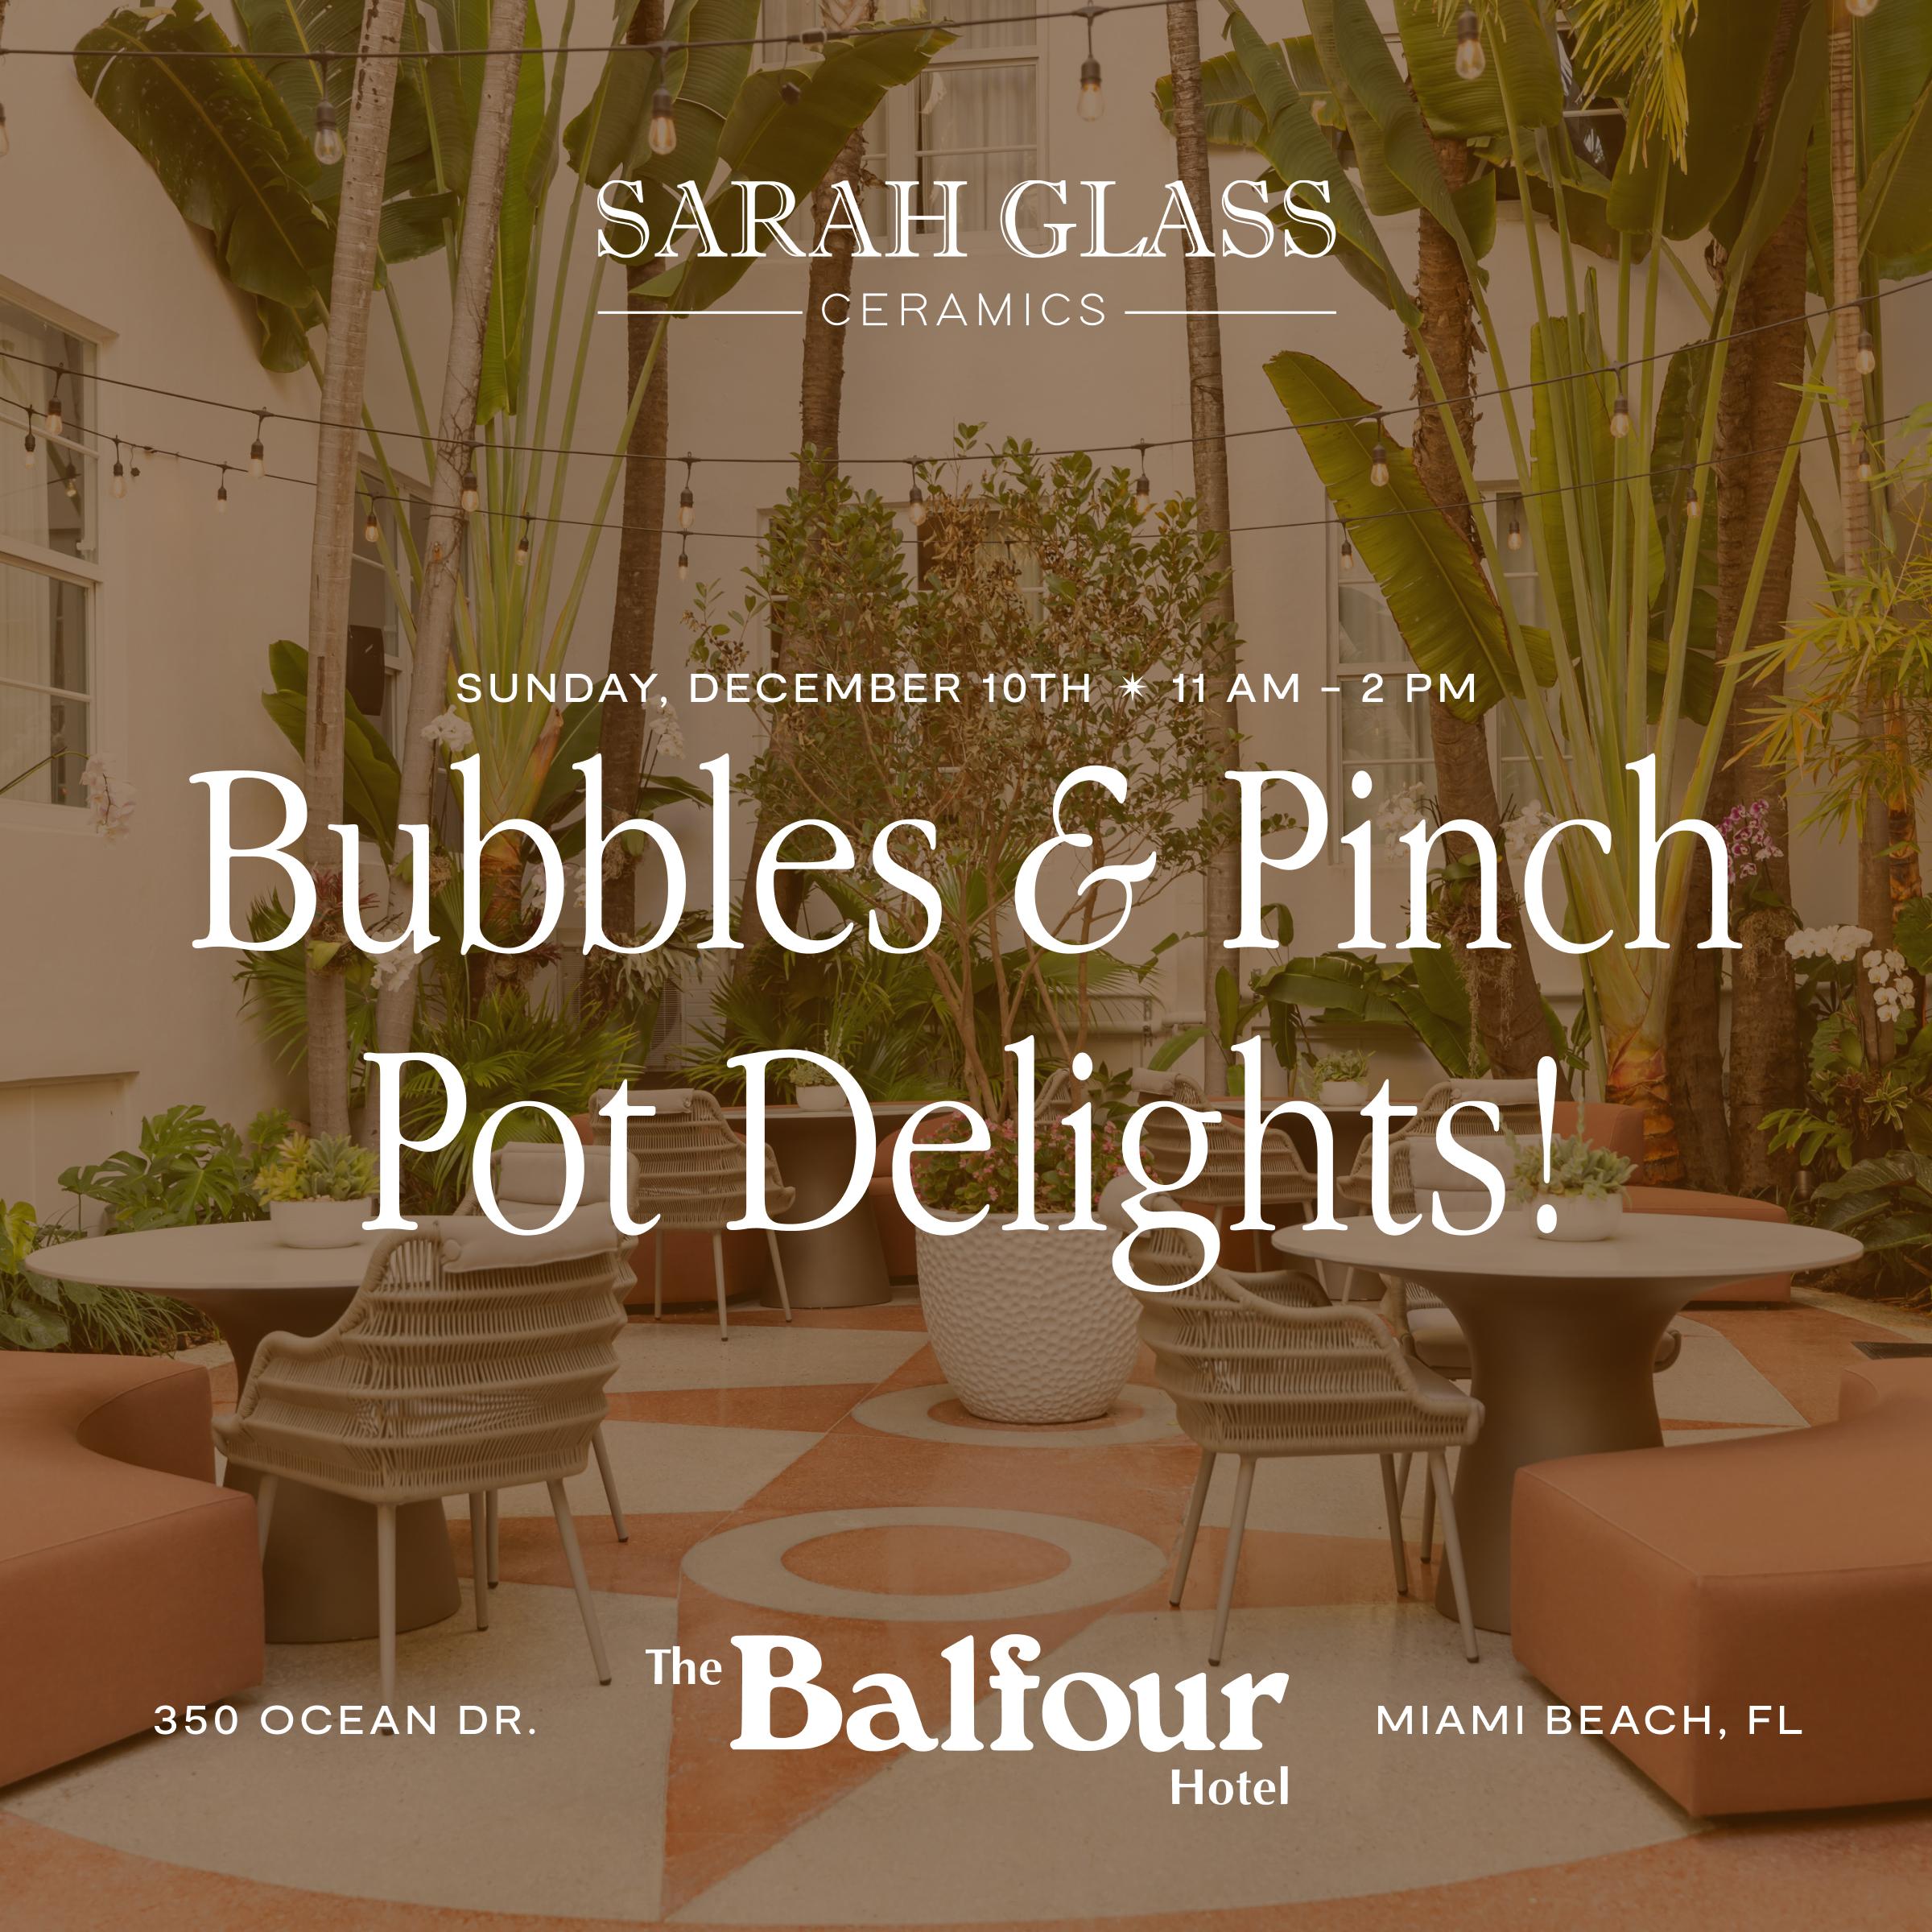 Bubbles & Pinch Pot Delights at The Balfour Hotel with Sarah Glass Ceramics